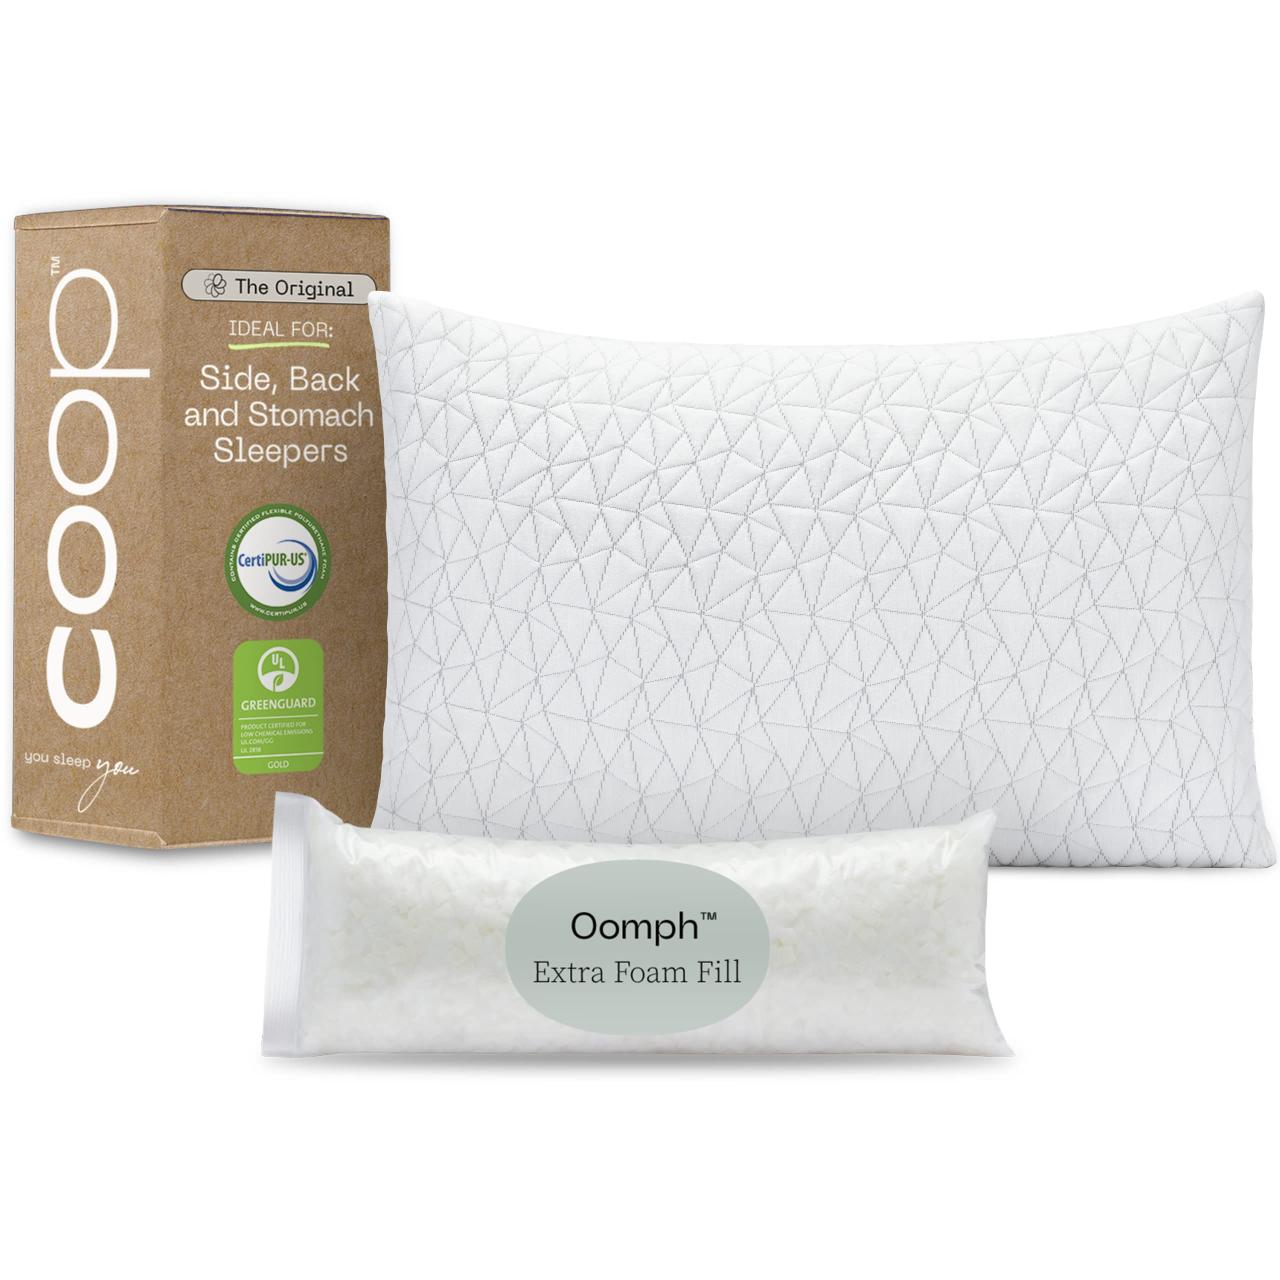 Amazon.Com: Coop Home Goods Original Loft,Queen Size Bed Pillows For  Sleeping - Adjustable Cross Cut Memory Foam Pillows - Medium Firm For Back,  Stomach And Side Sleeper - Certipur-Us/Greenguard Gold : Home